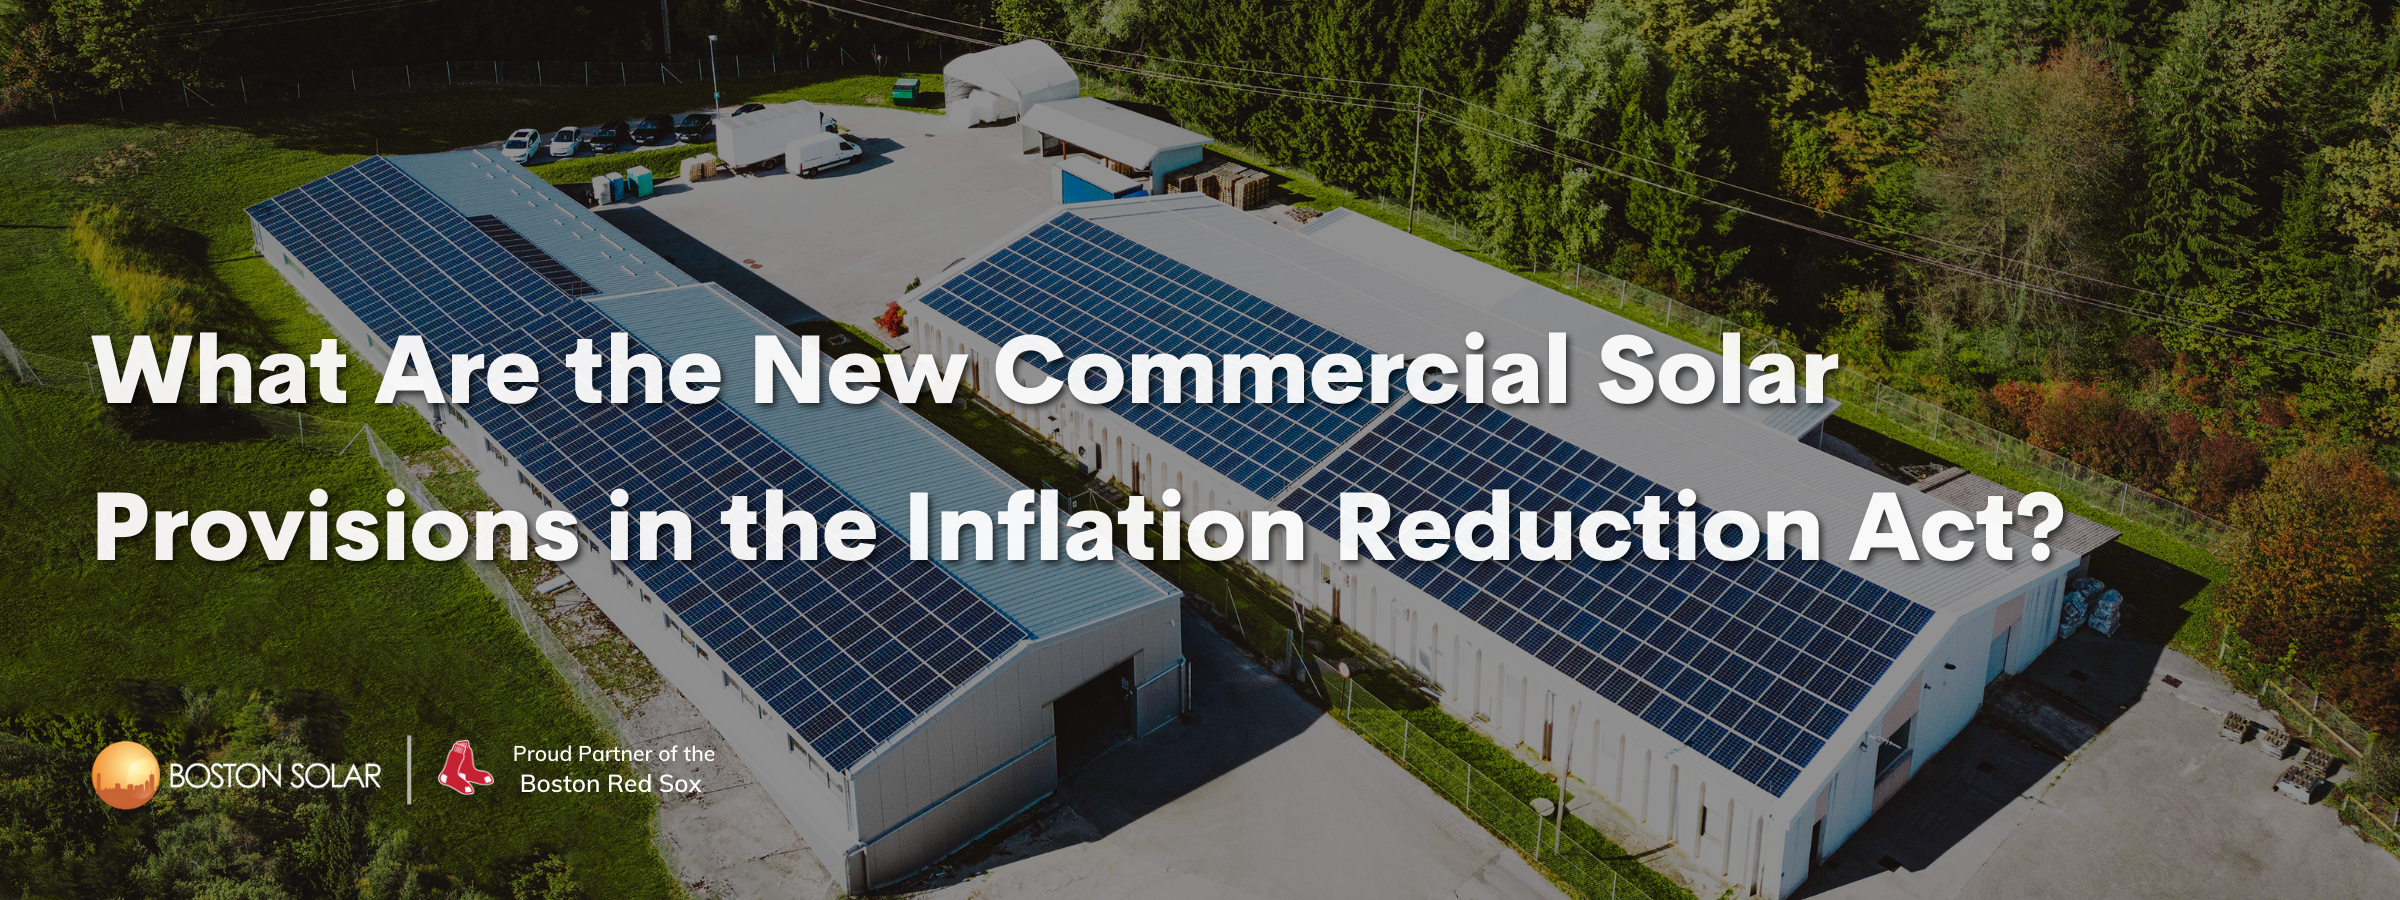 What Are the New Commercial Solar Provisions in the Inflation Reduction Act?